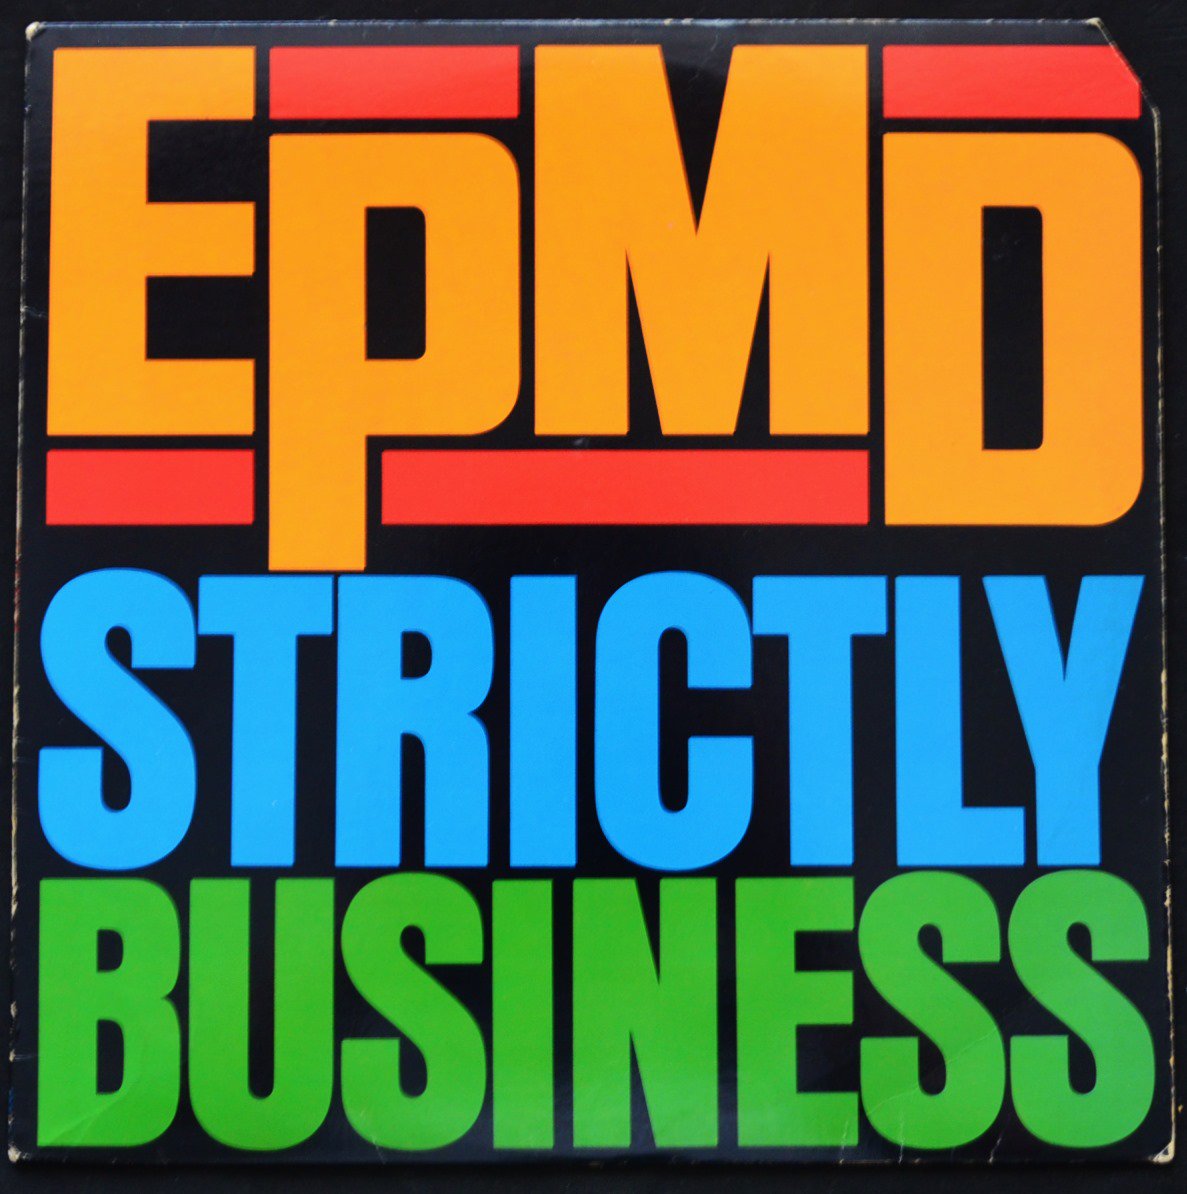 EPMD / STRICTLY BUSINESS (12